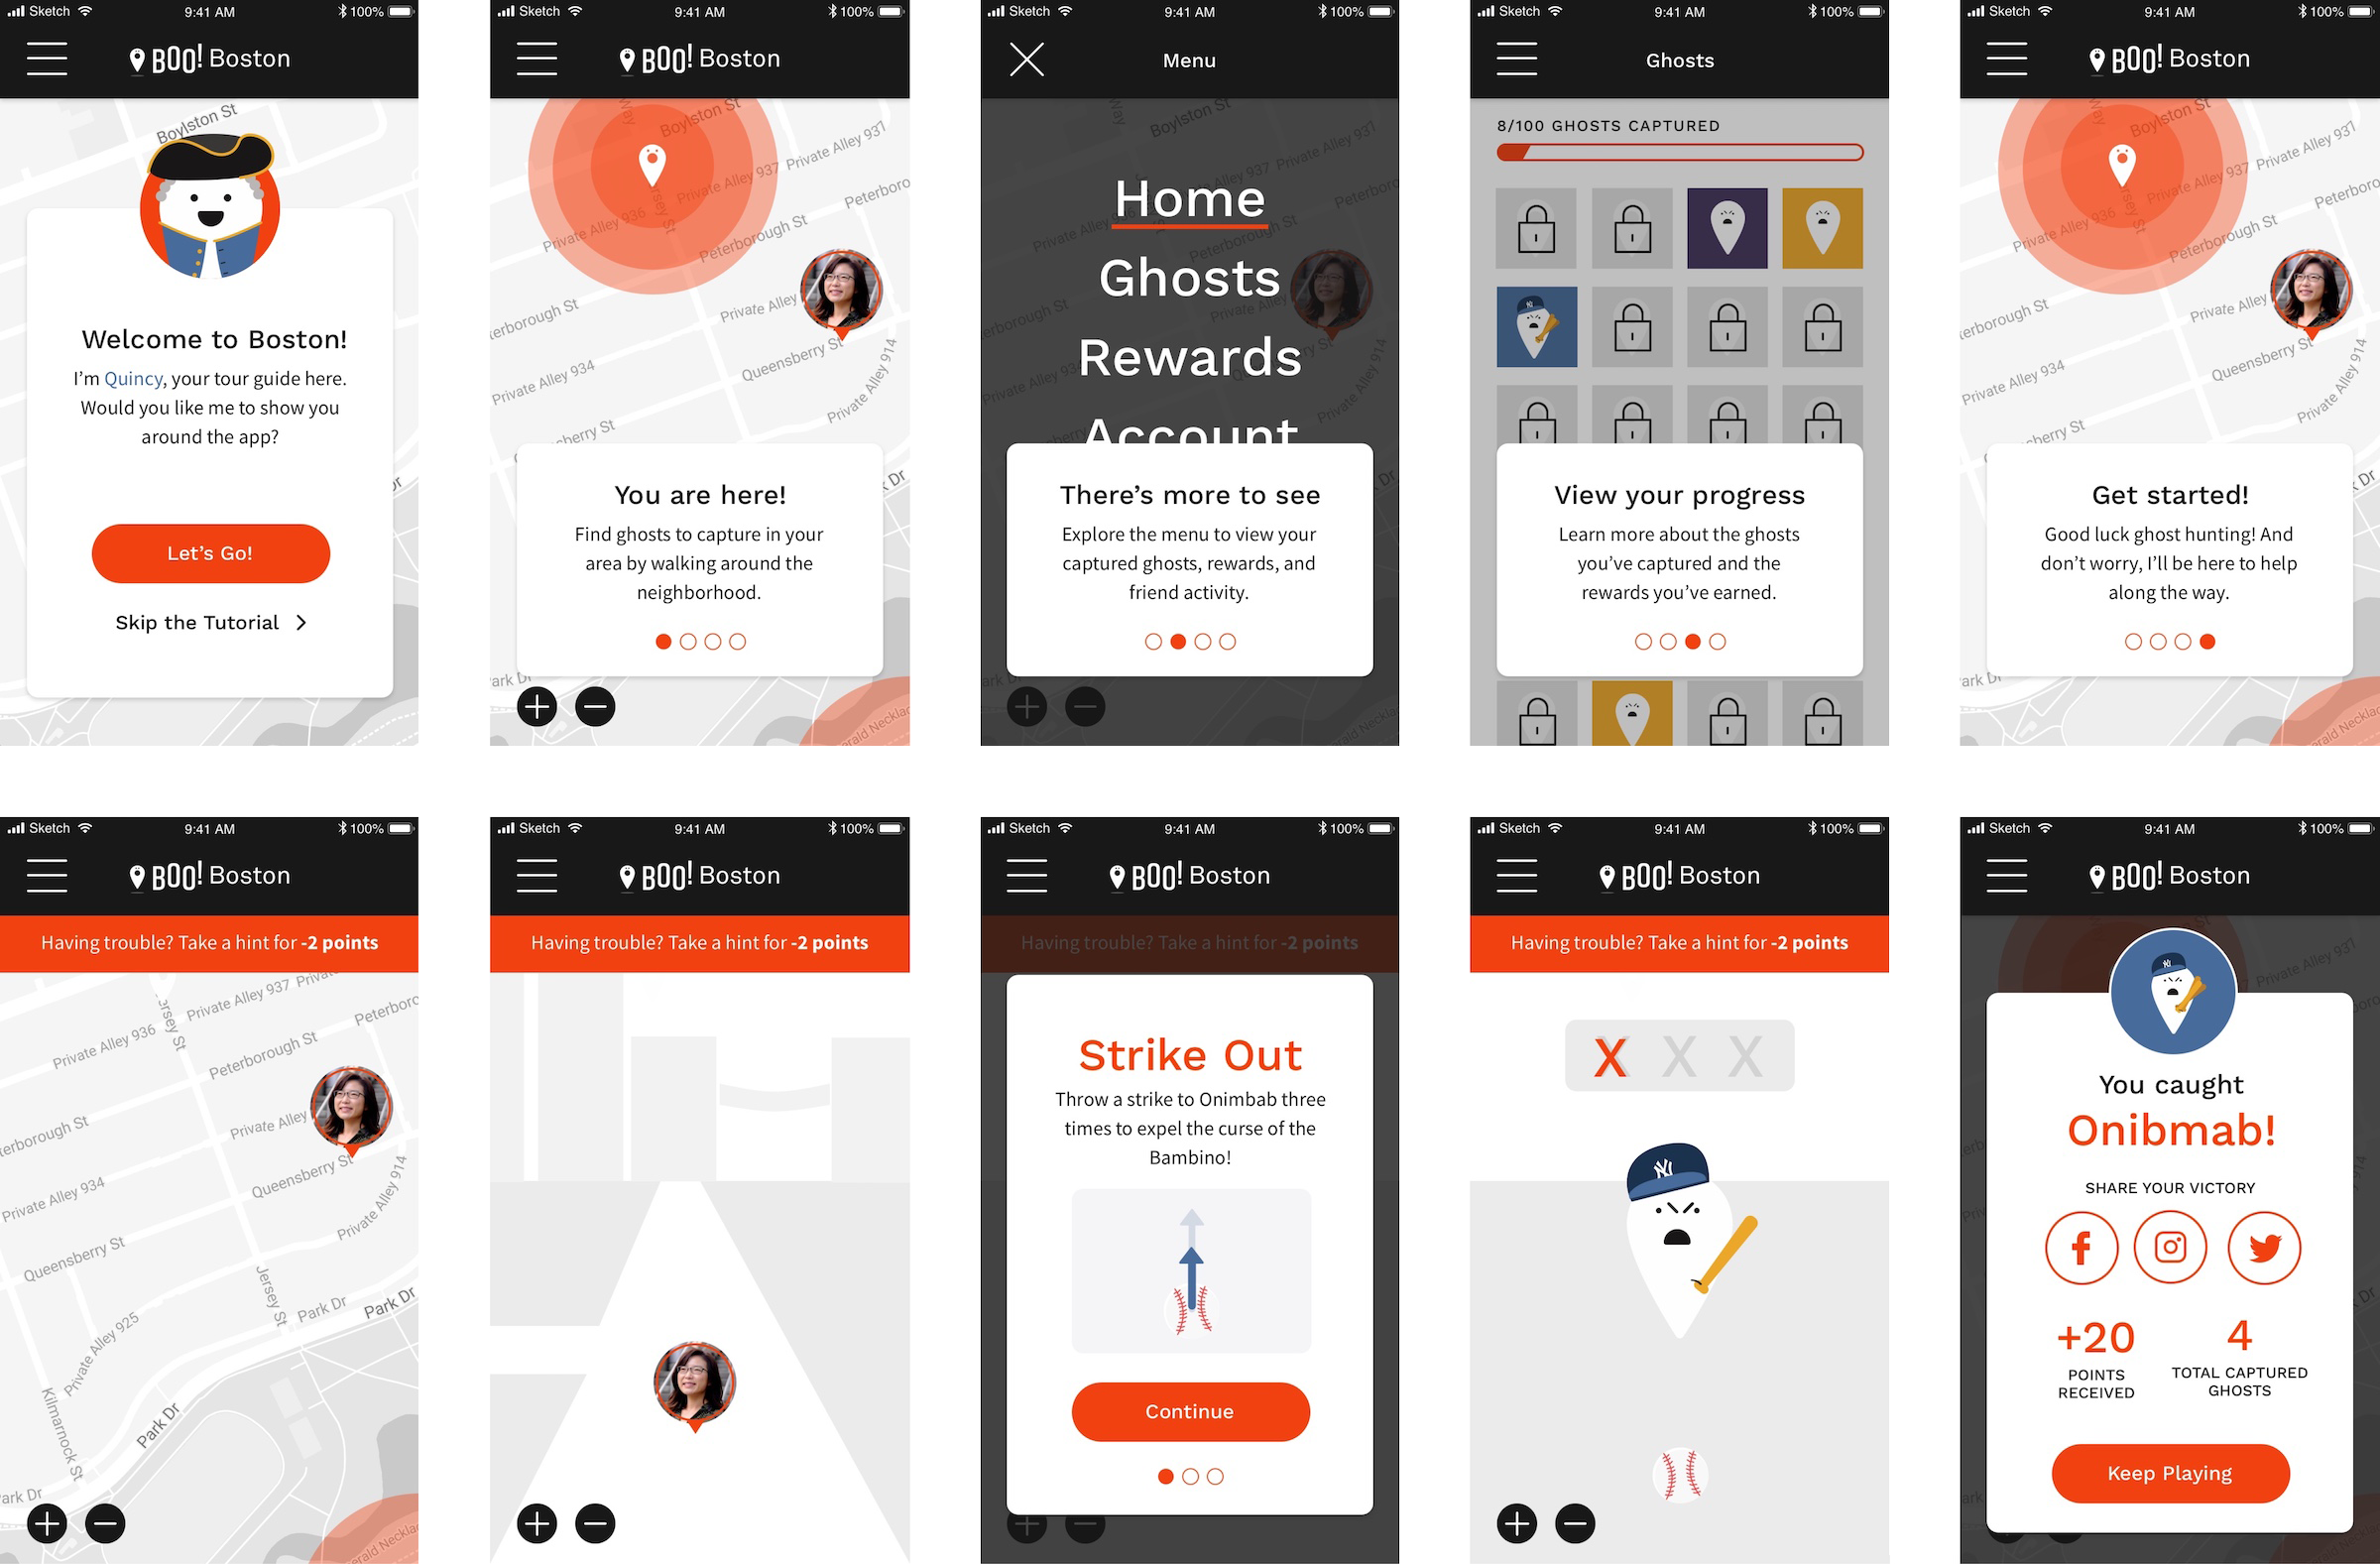 Ten screens from our finalized UI mockups that show the on-boarding experience and core ghost finding and catching feature.